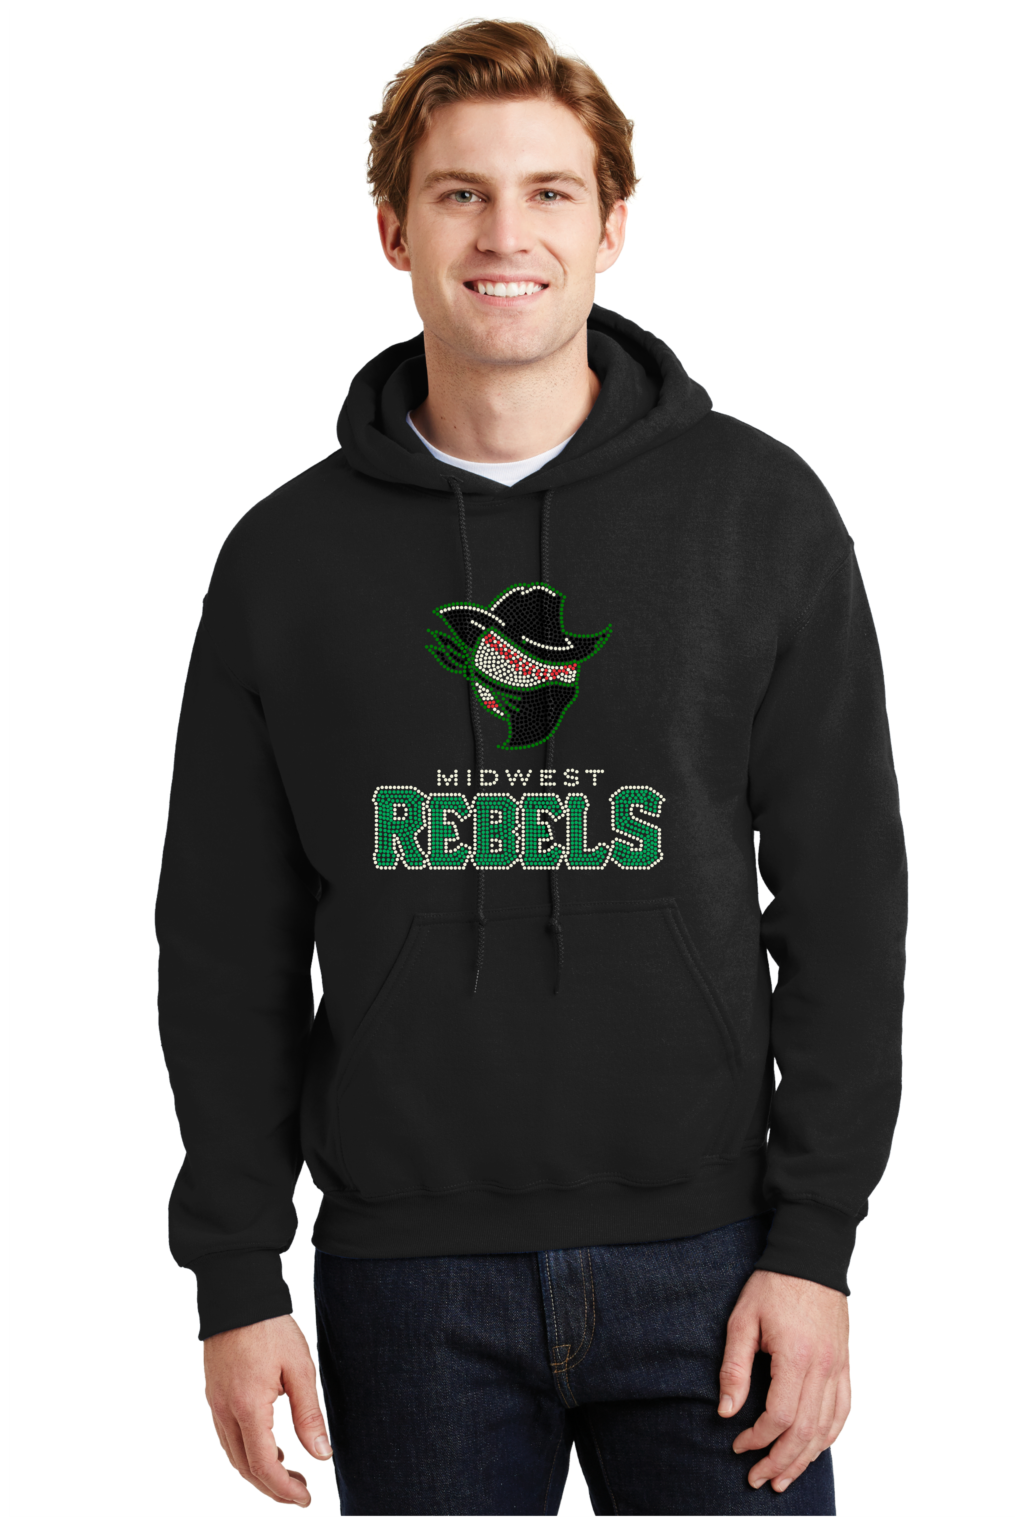 Midwest Rebels Mascot with Text - Sparkle Gear